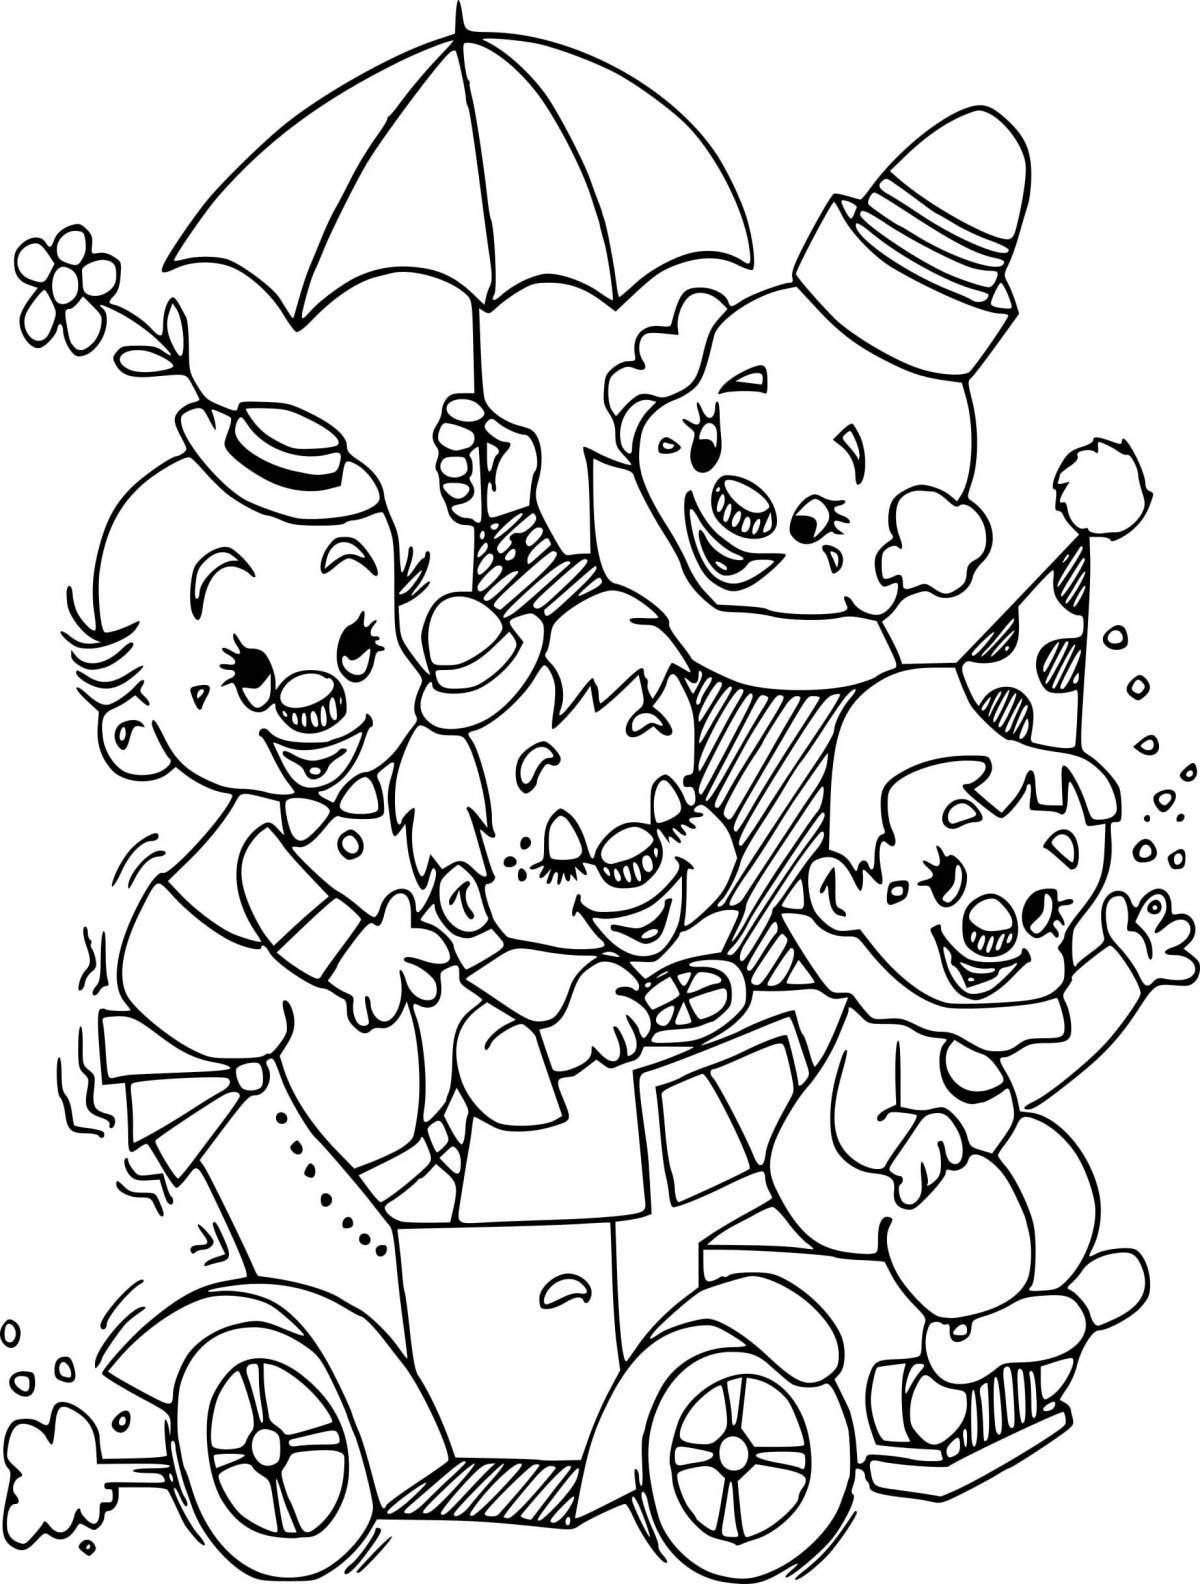 Playful circus coloring book for 7-8 year olds